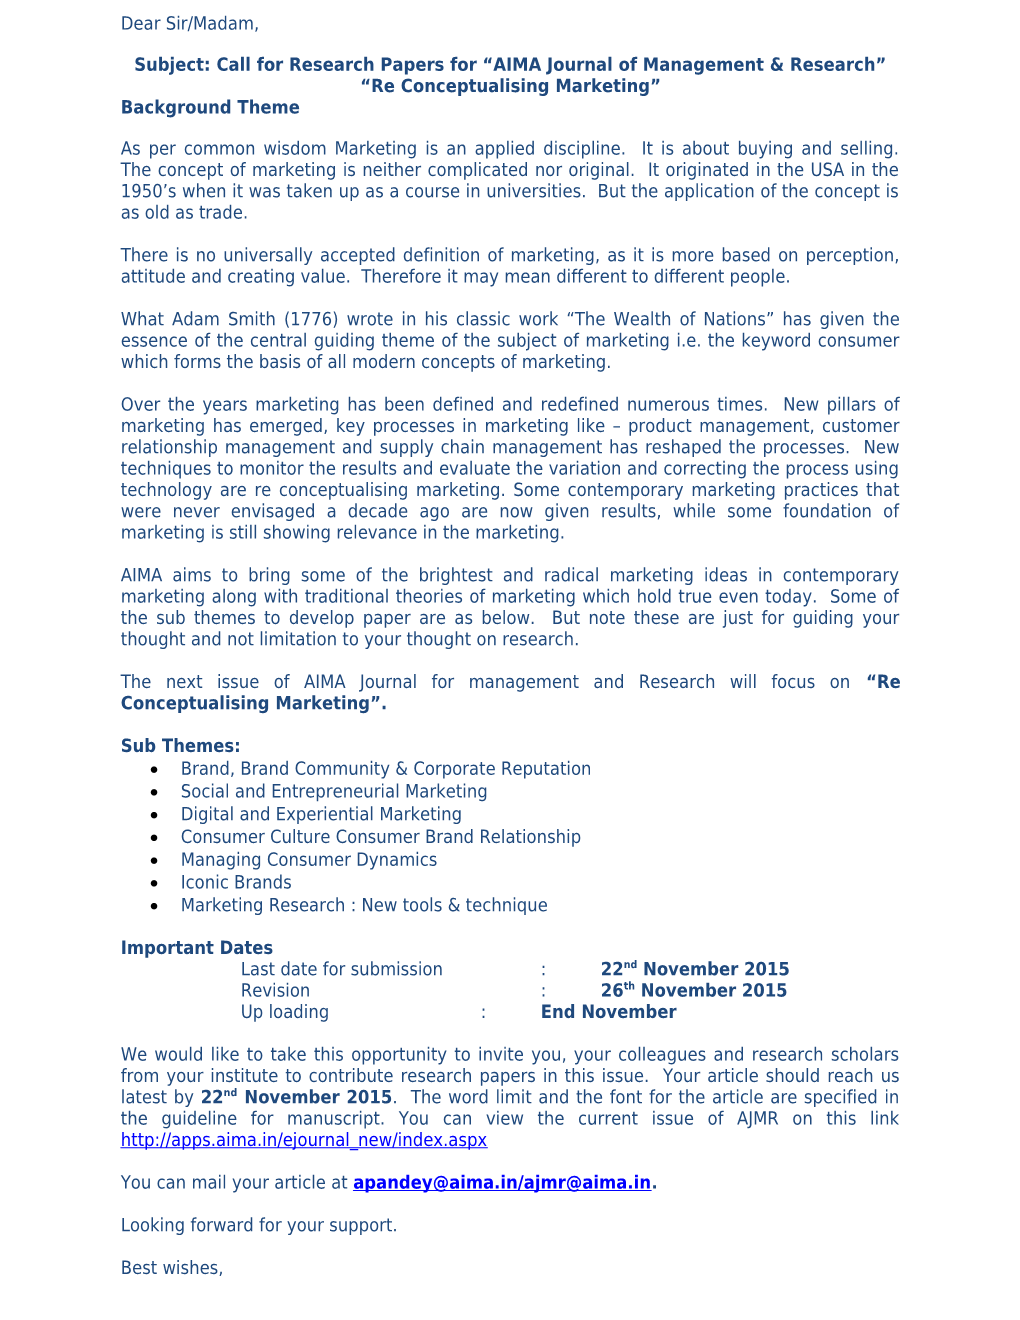 Subject: Call for Research Papers for AIMA Journal of Management & Research